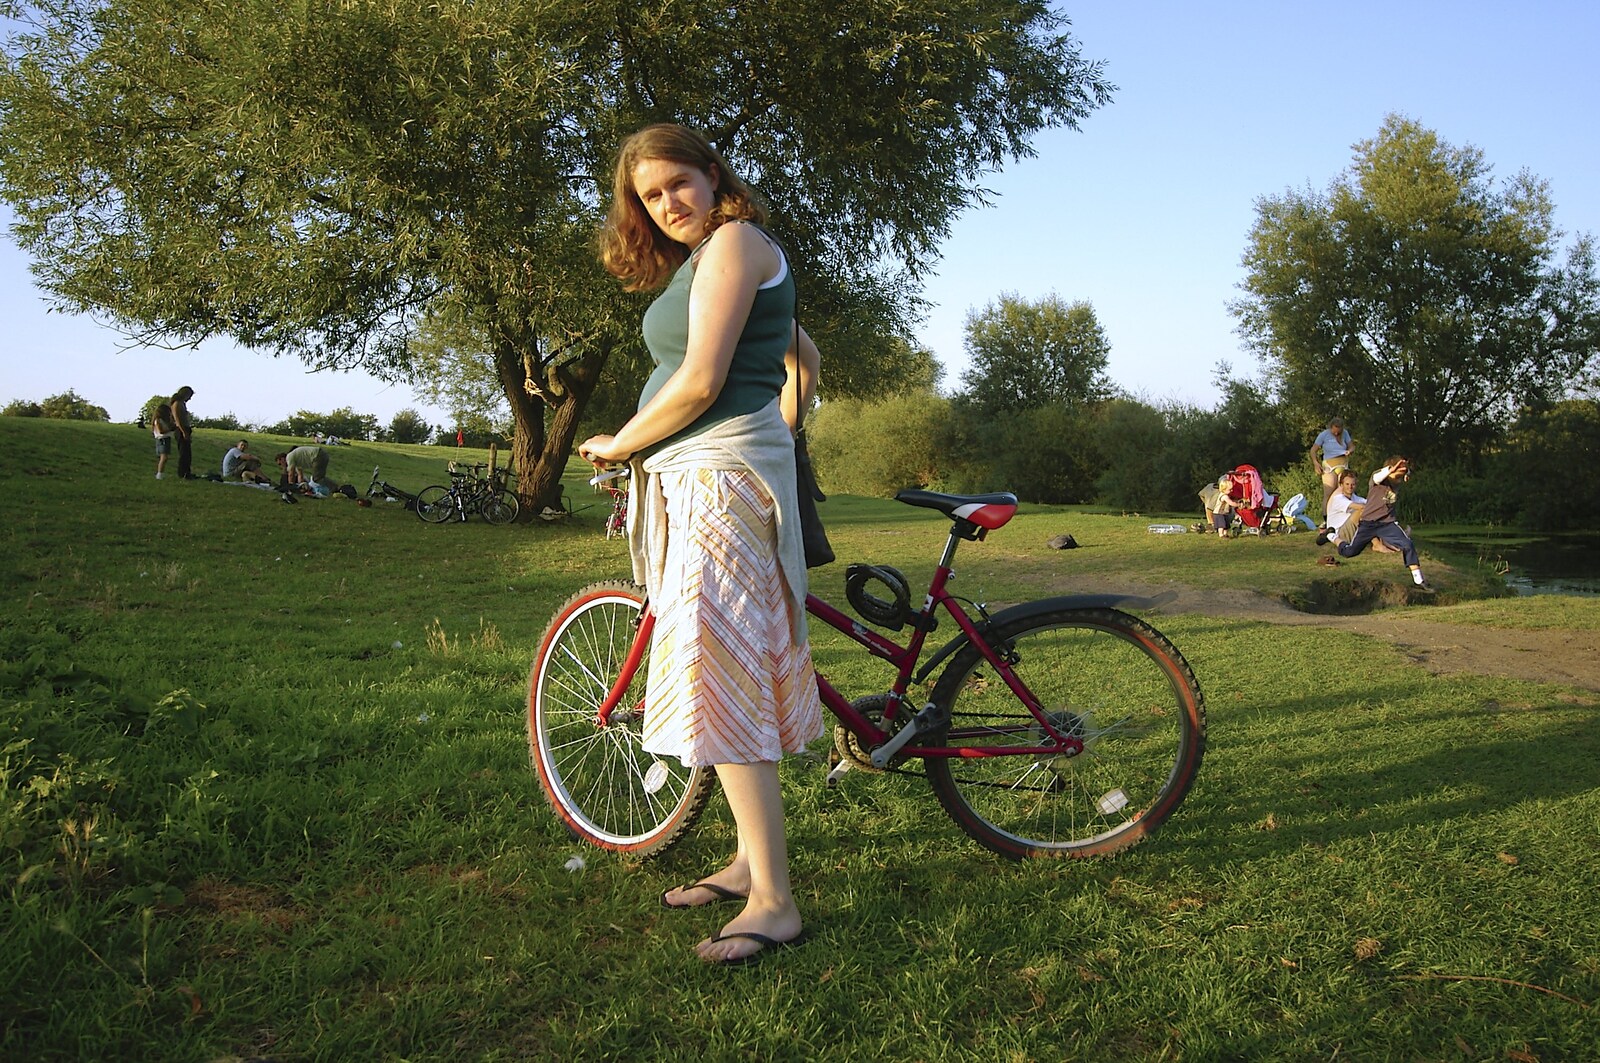 Isobel with her bike, ready to leave from Grantchester Meadows, Alex Hill at Revs and Spitfires - 10th September 2006